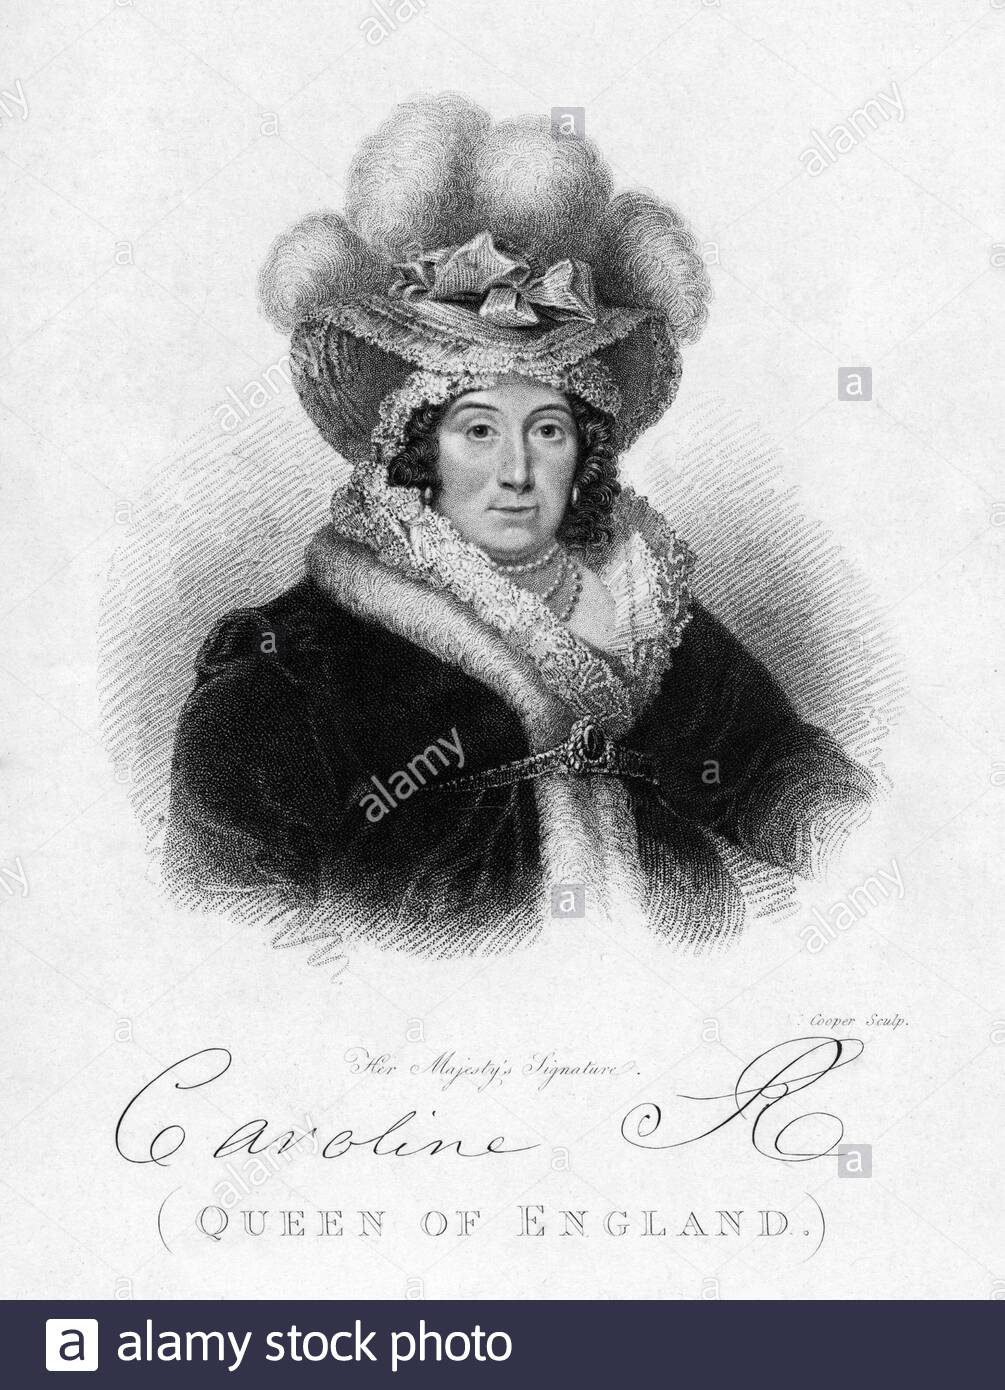 Caroline of Brunswick, 1768 – 1821, was Queen of the United Kingdom and Hanover as the wife of King George IV from 29 January 1820 until her death in 1821. She was the Princess of Wales from 1795 to 1820. Stock Photo